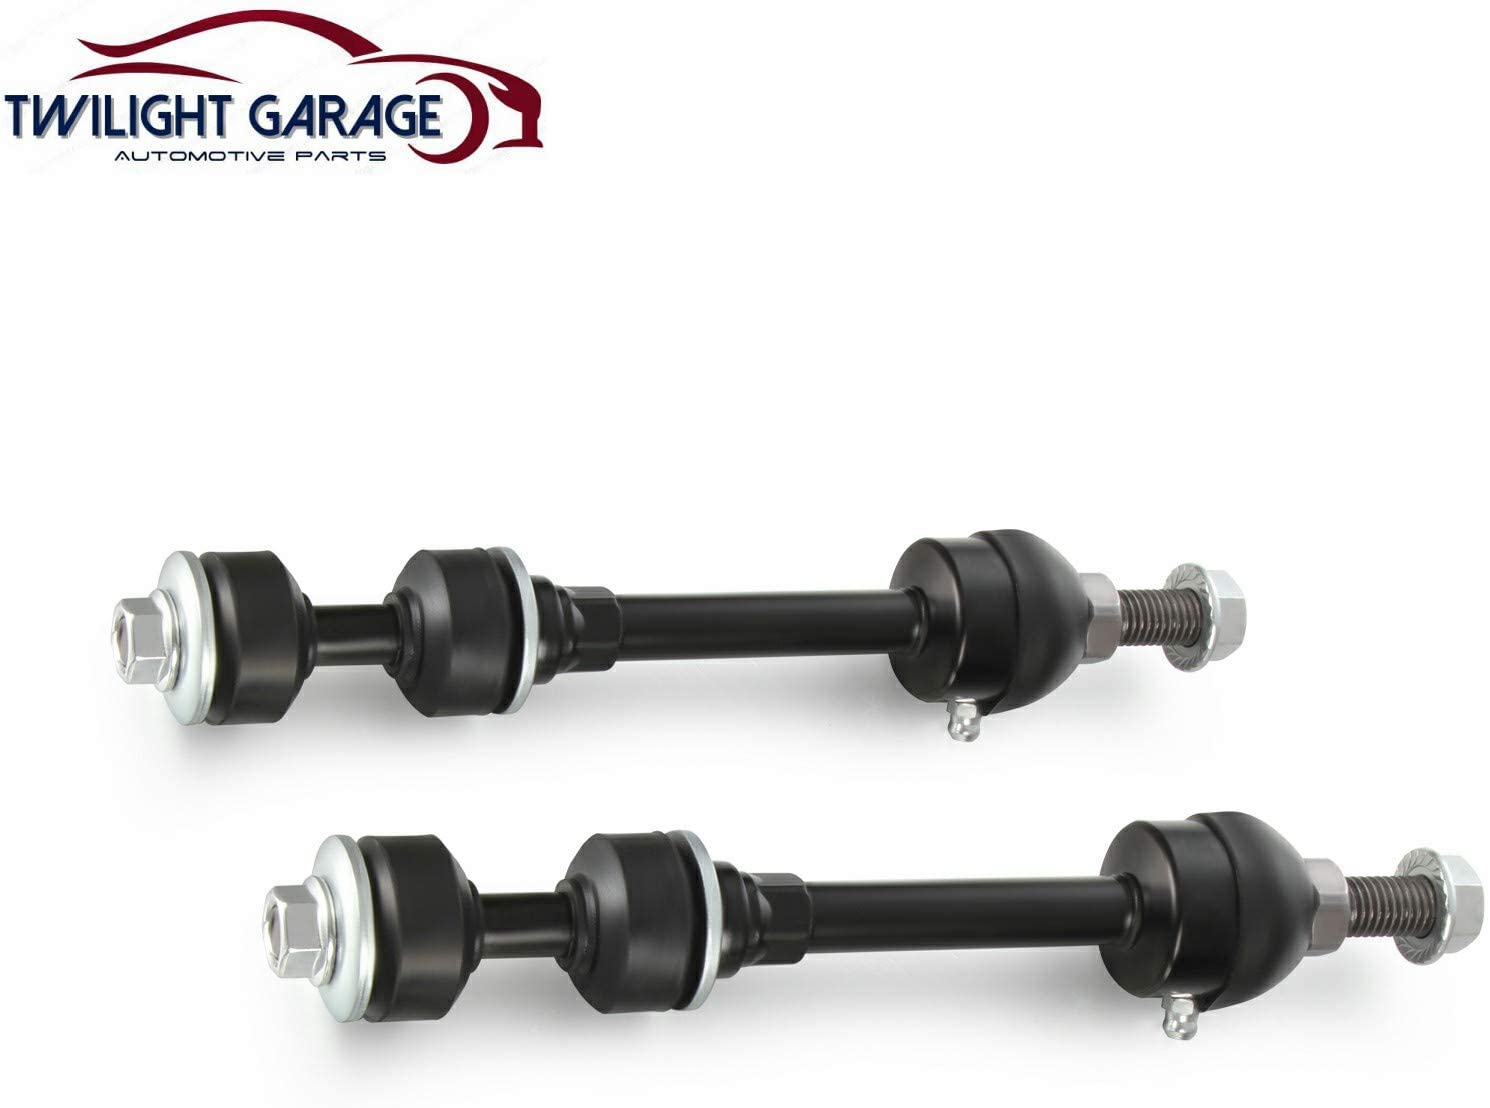 Twilight Garage Pair of Front Stabilizer Sway Bar Link For 2005-2008 For-d F-150 4x4, LINCOLN MARK LT 2006-2008 4x4